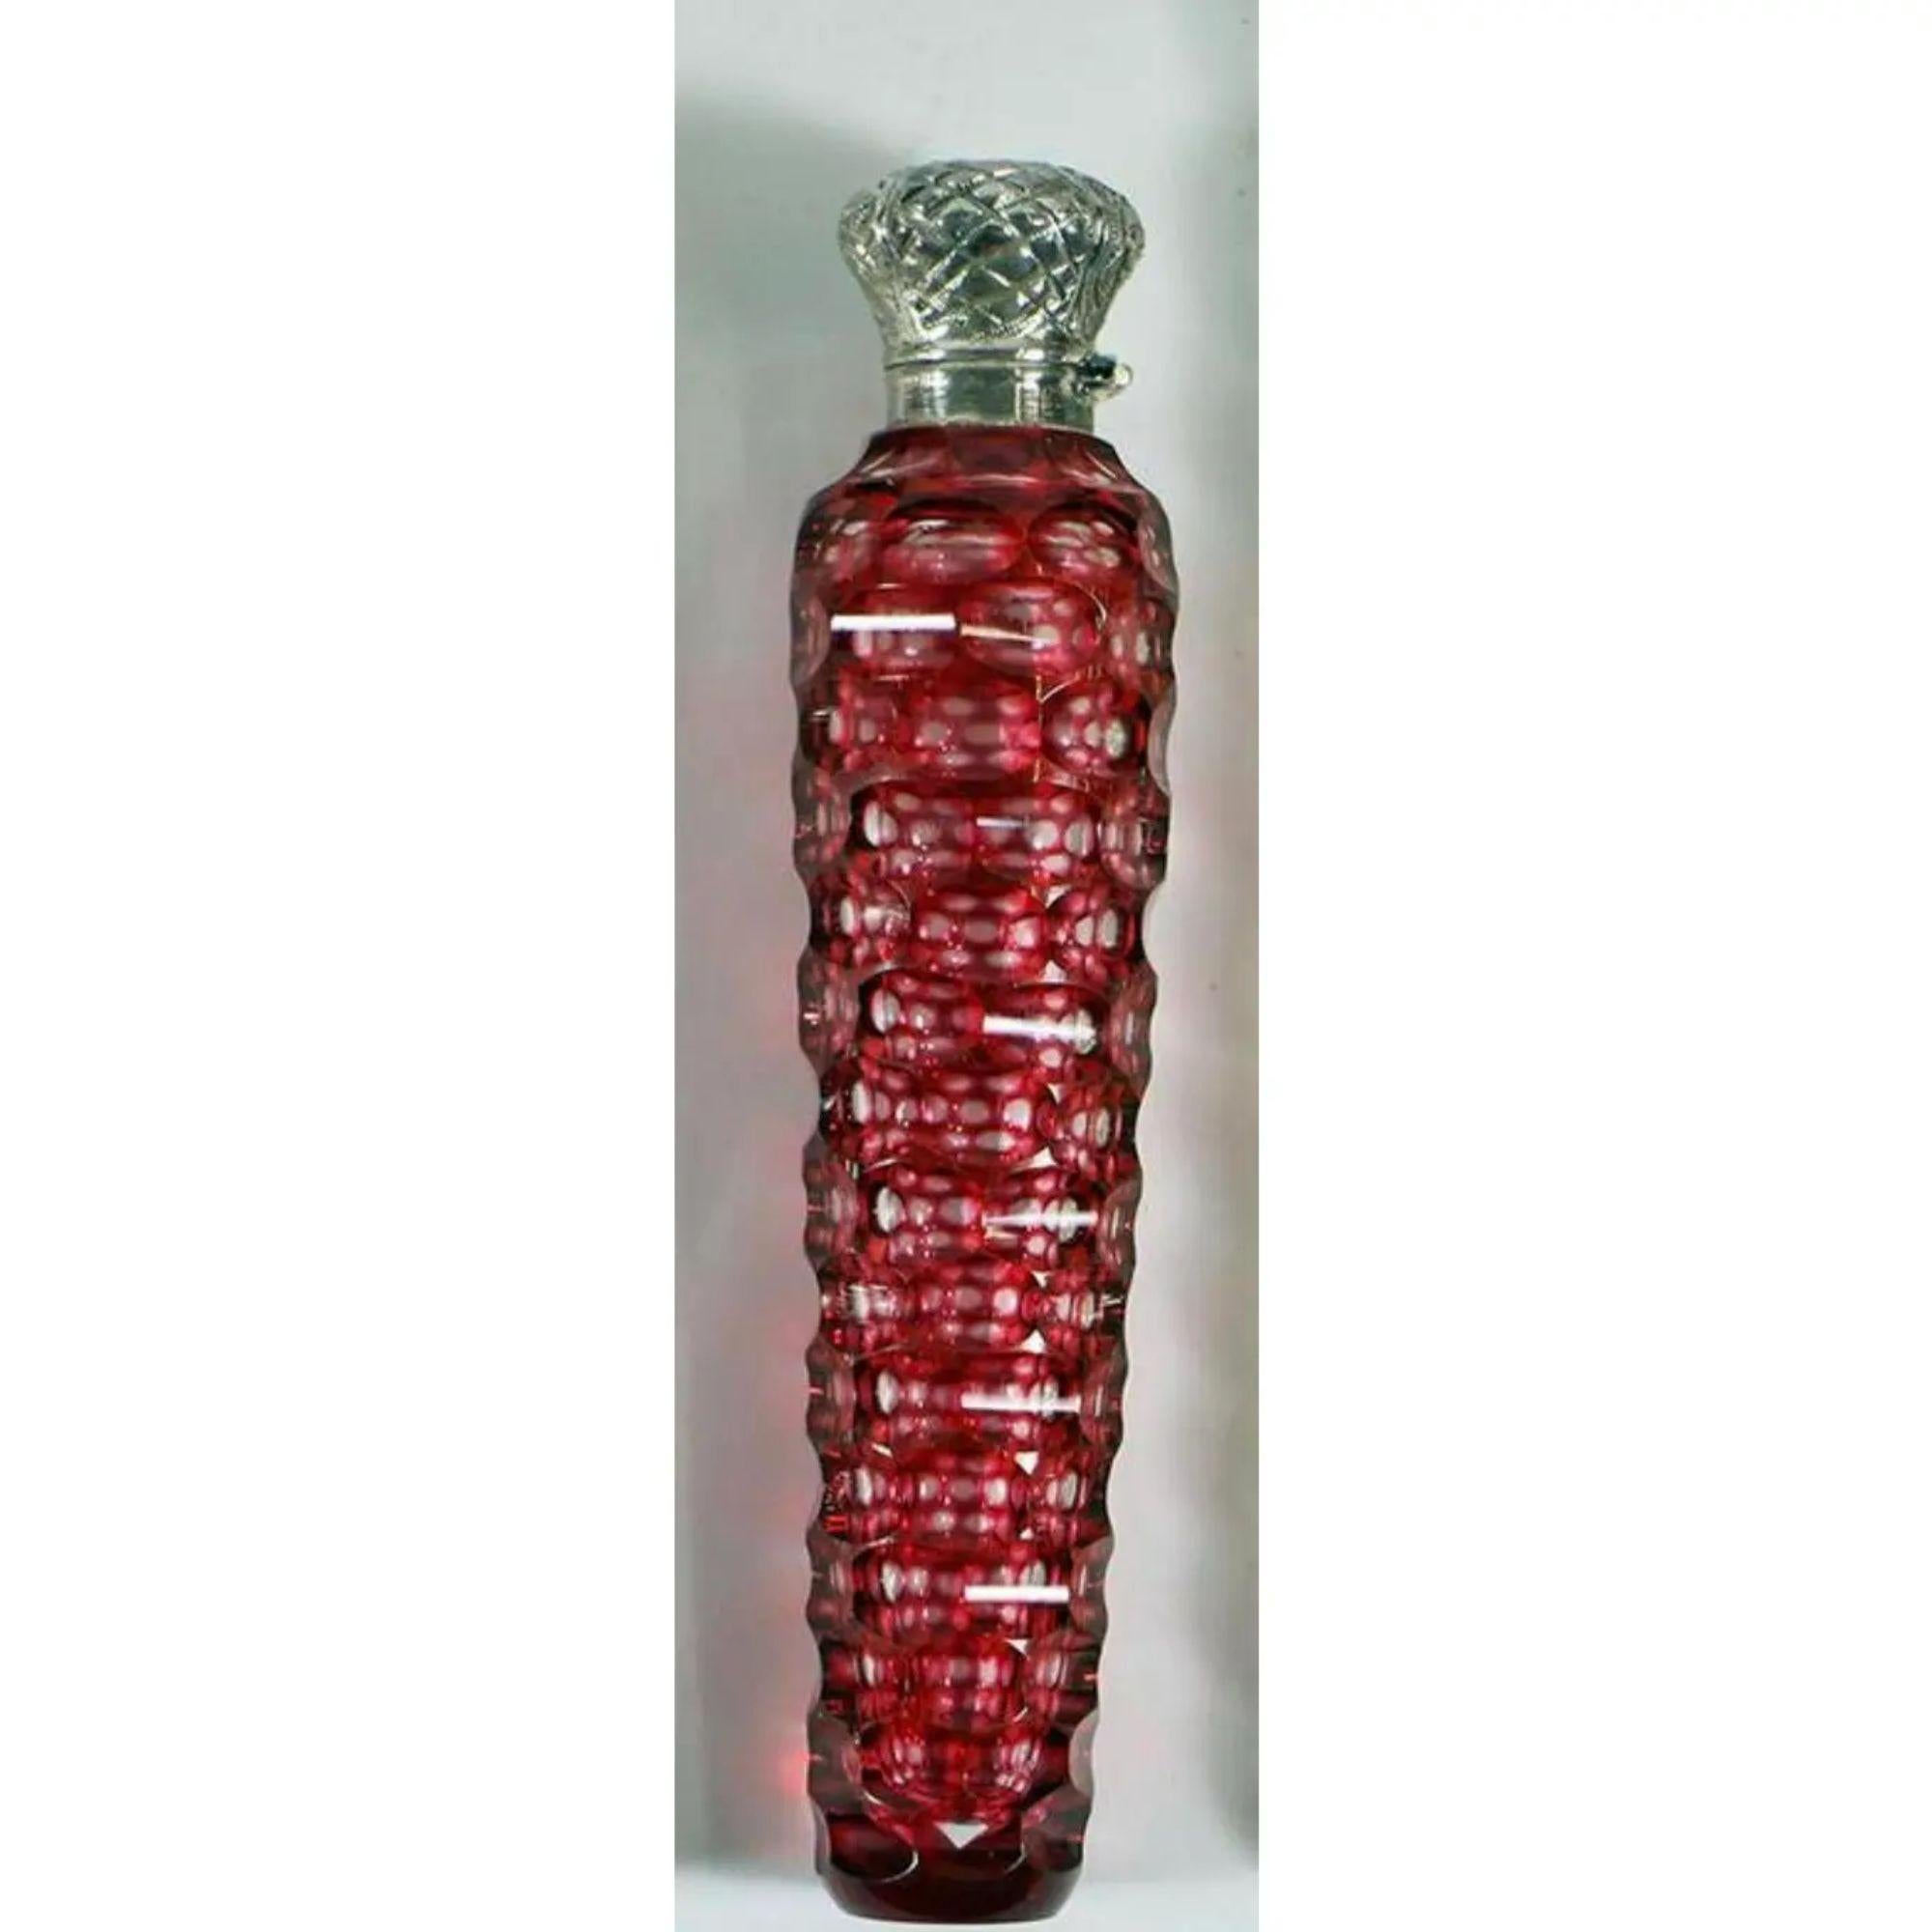 Antique sterling silver mounted red cut crystal perfume flask bottle

Additional information:
Materials: Crystal, Sterling Silver
Color: Red
Period: 19th century
Styles: Victorian
Item Type: Vintage, Antique or Pre-owned
Dimensions: 1.25